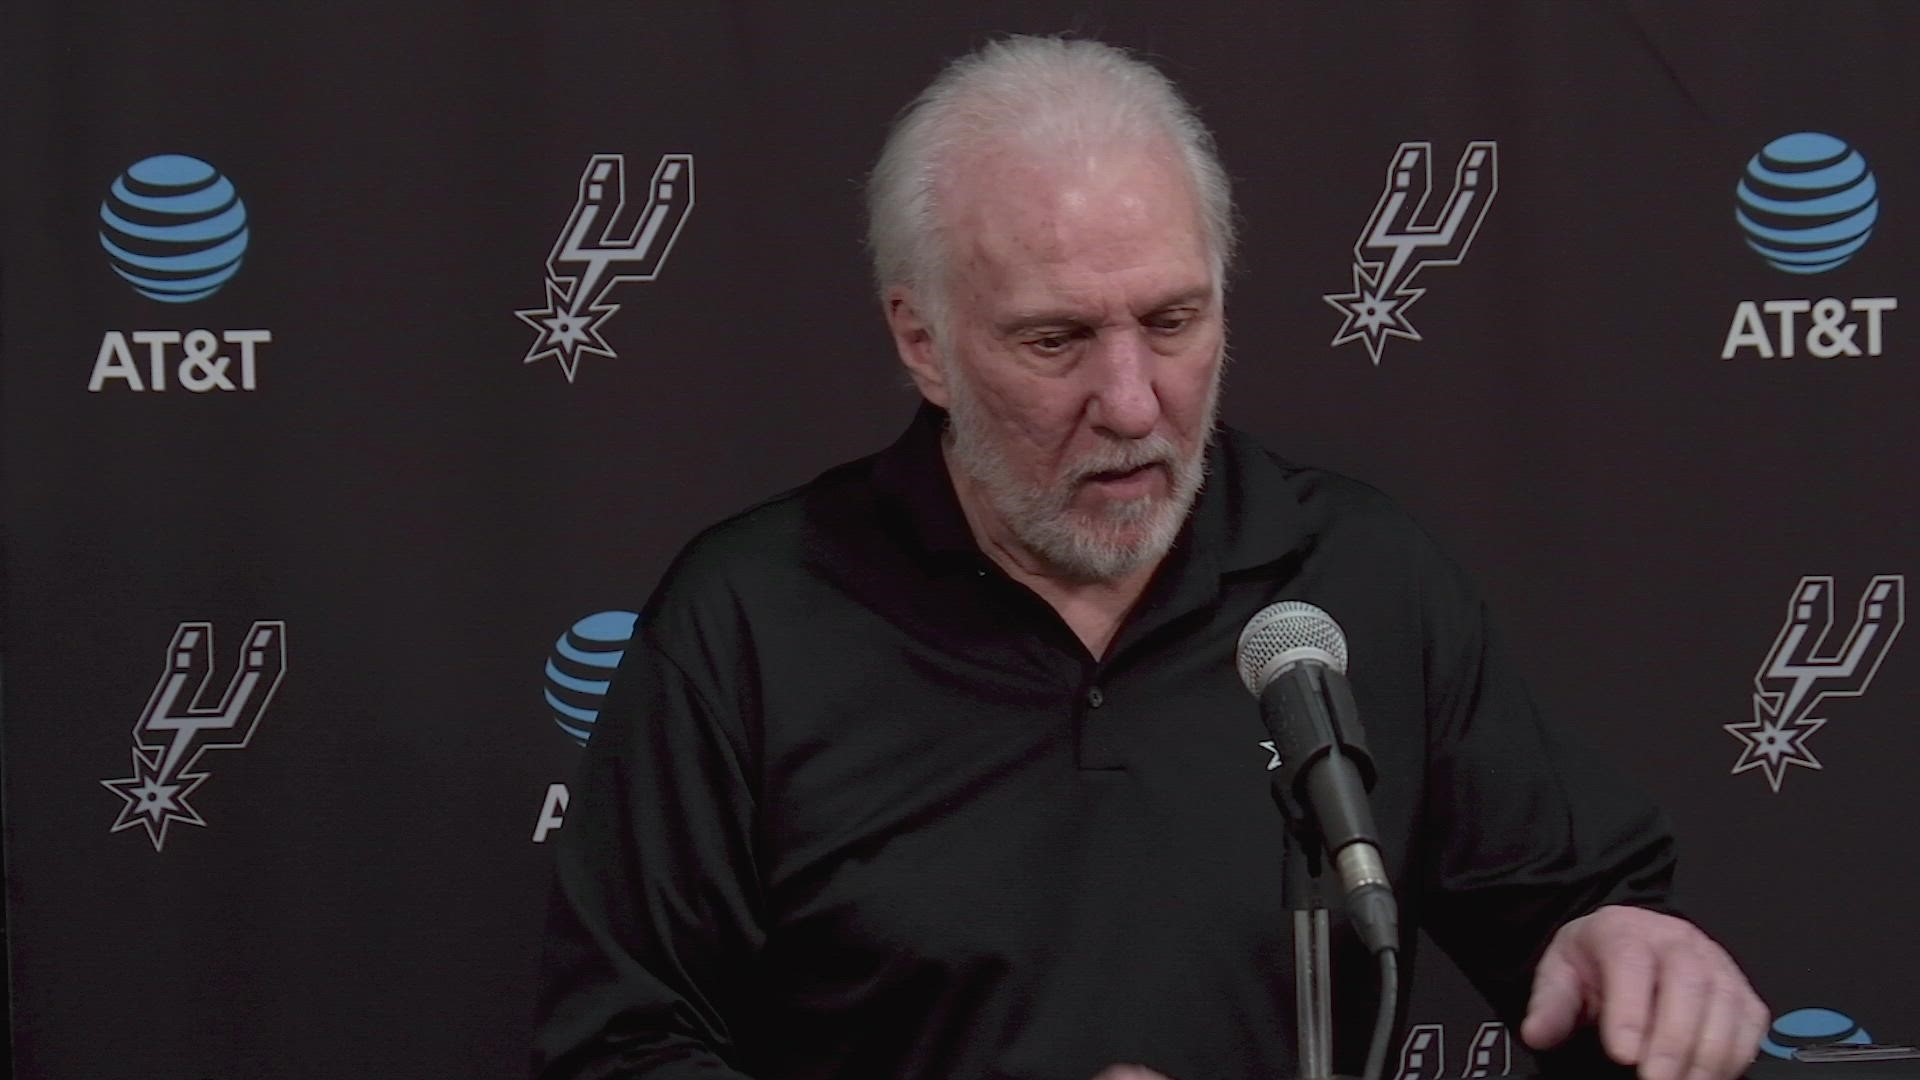 "It's something we have to mature through," Popovich said. "It's hopefully a good lesson that no team is gonna die."